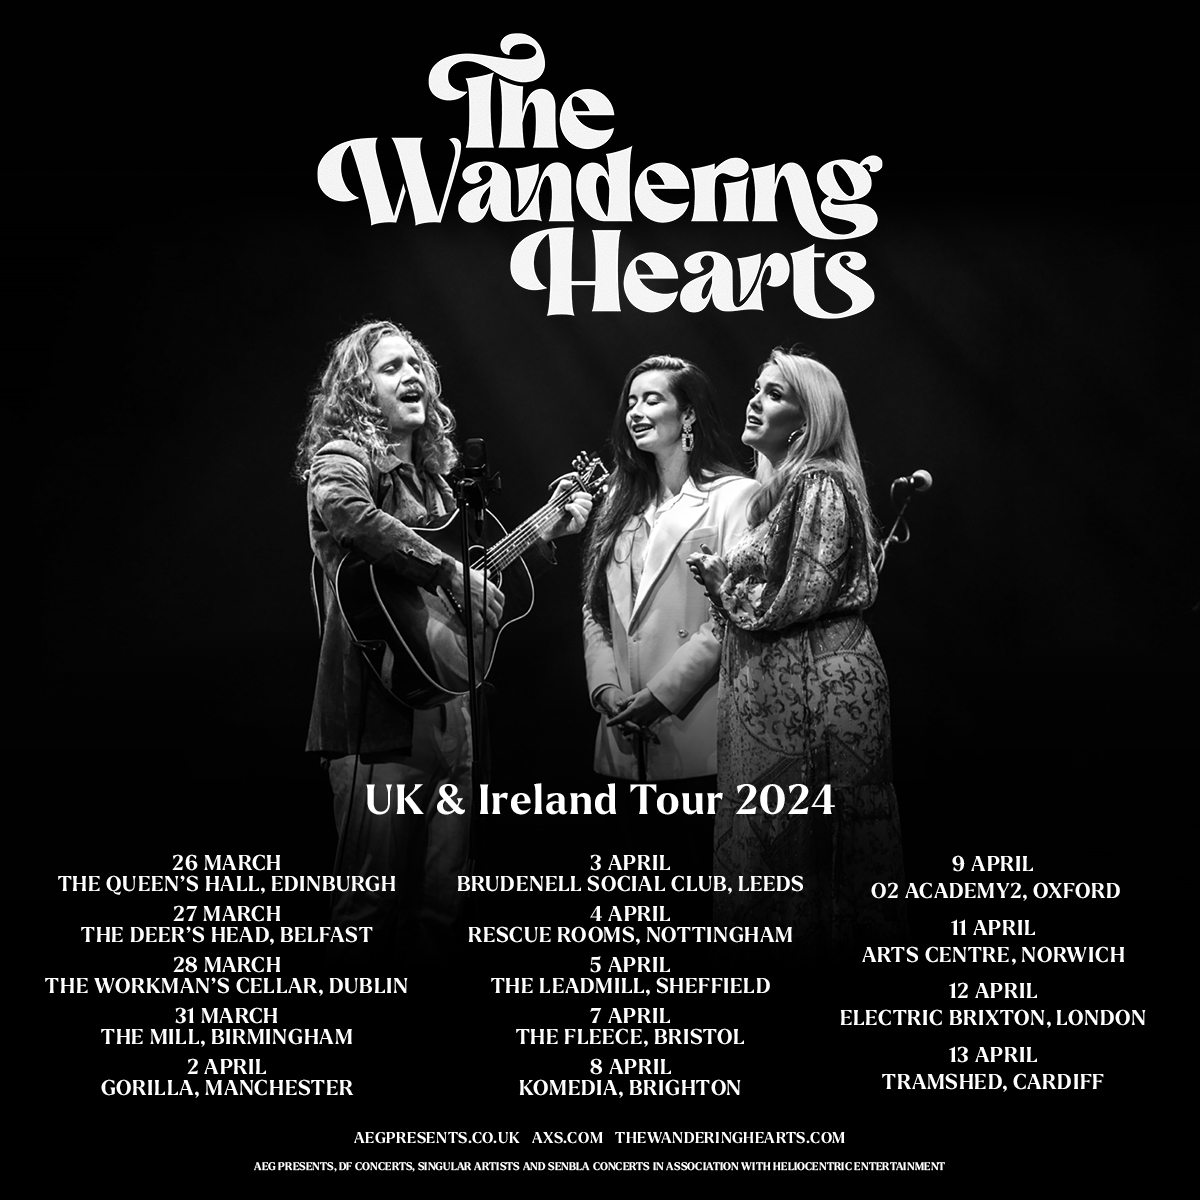 The release of #TheWanderingHearts EP ‘Hesperus’ in May hints at a flavour of their forthcoming album (due 2024). The band have also announced a UK tour, here on Tuesday 09 April. 

Priority Tickets on sale now. Head to #O2Priority - amg-venues.com/qQum50PkLMC